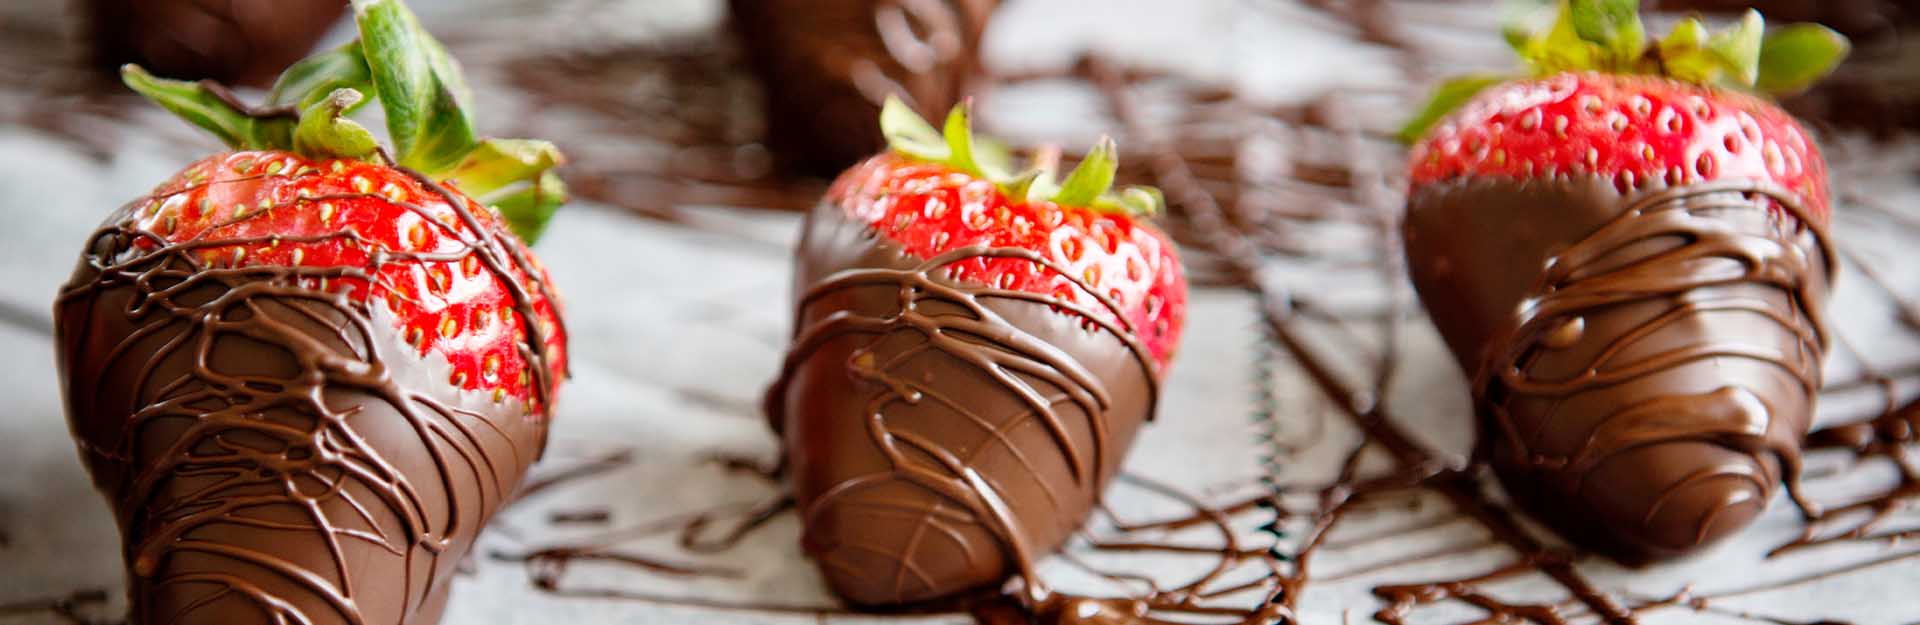 Three chocolate covered strawberries sitting on parchment paper.